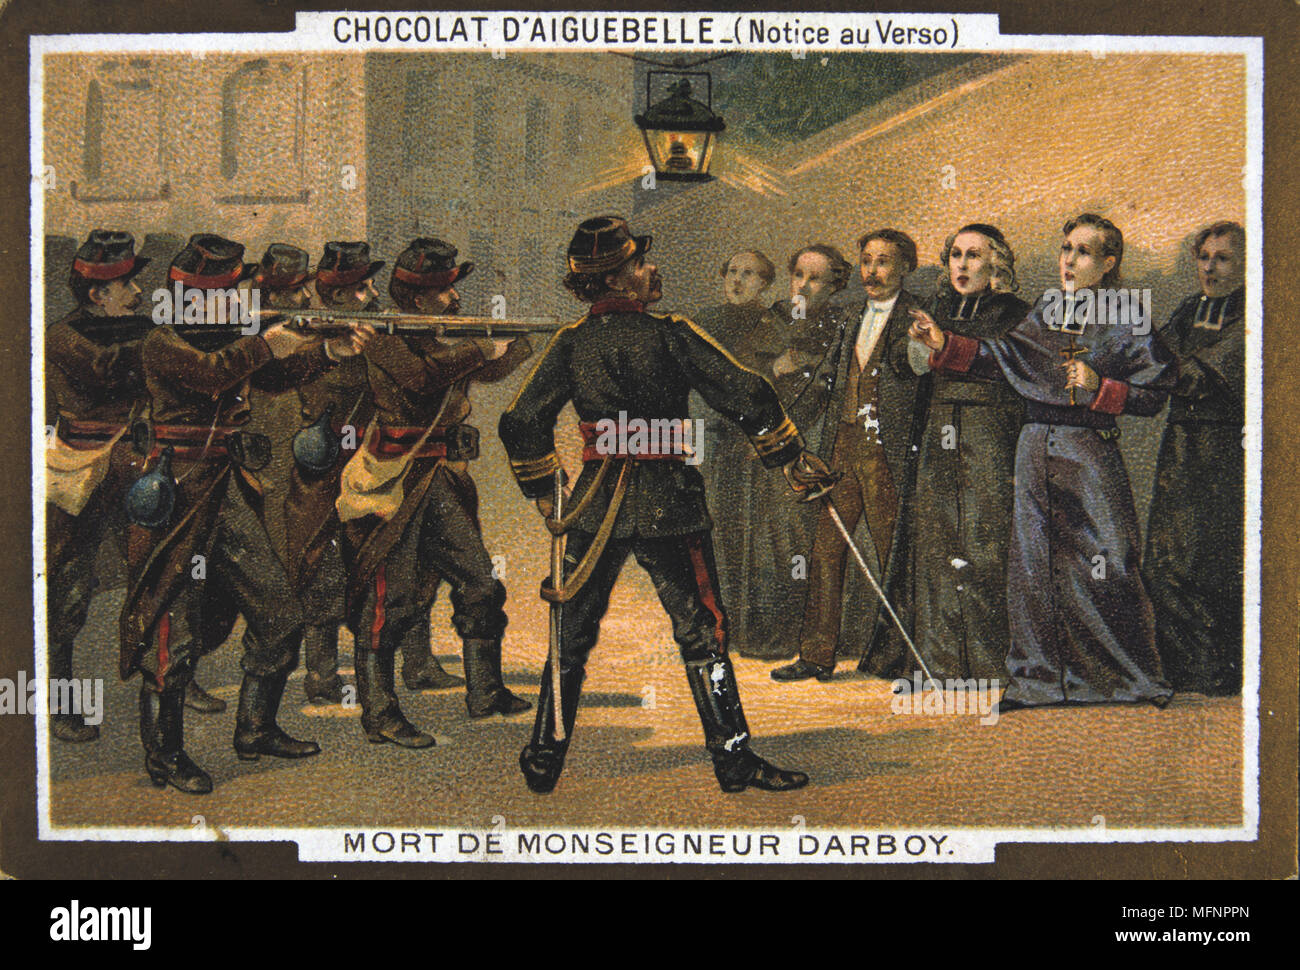 Paris Commune 26 March-28 May 1871. The Bloody Week:  Execution of hostages by the Commune. Mgr Darboy, Archbishop of Paris, and 5 other hostages shot  in the prison of la Roquette on the orders of Theophile Ferre, 24 May. Chromolithograph. Stock Photo